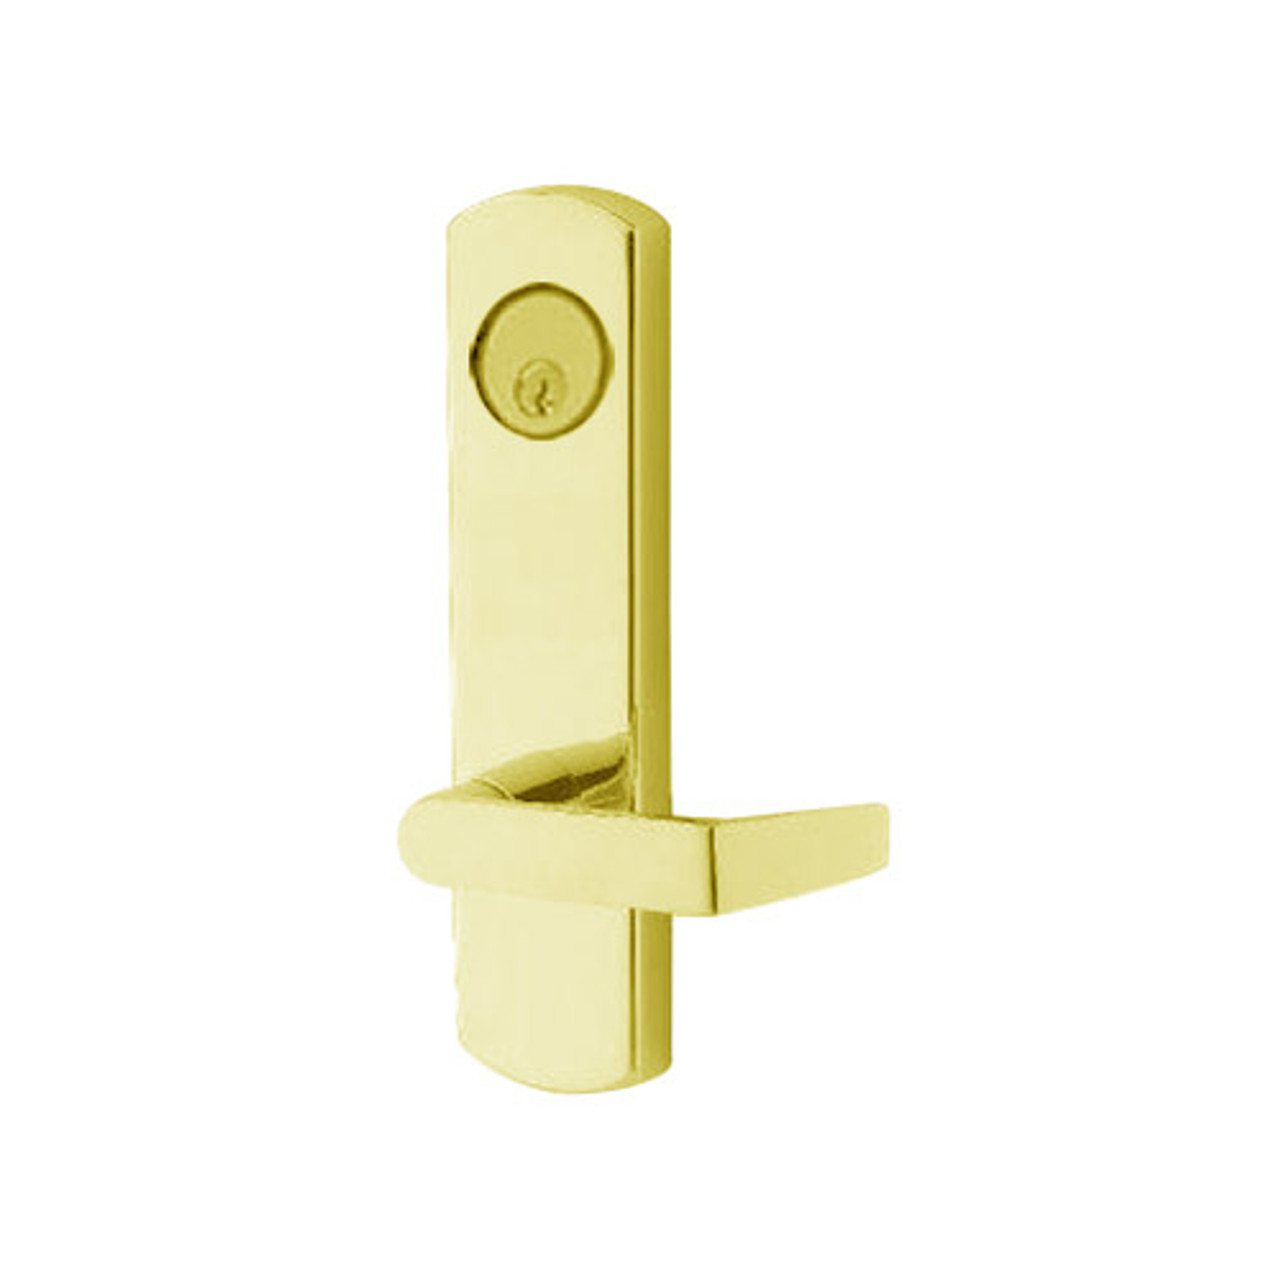 3080-03-0-31-US3 Adams Rite Standard Entry Trim with Square Lever in Bright Brass Finish